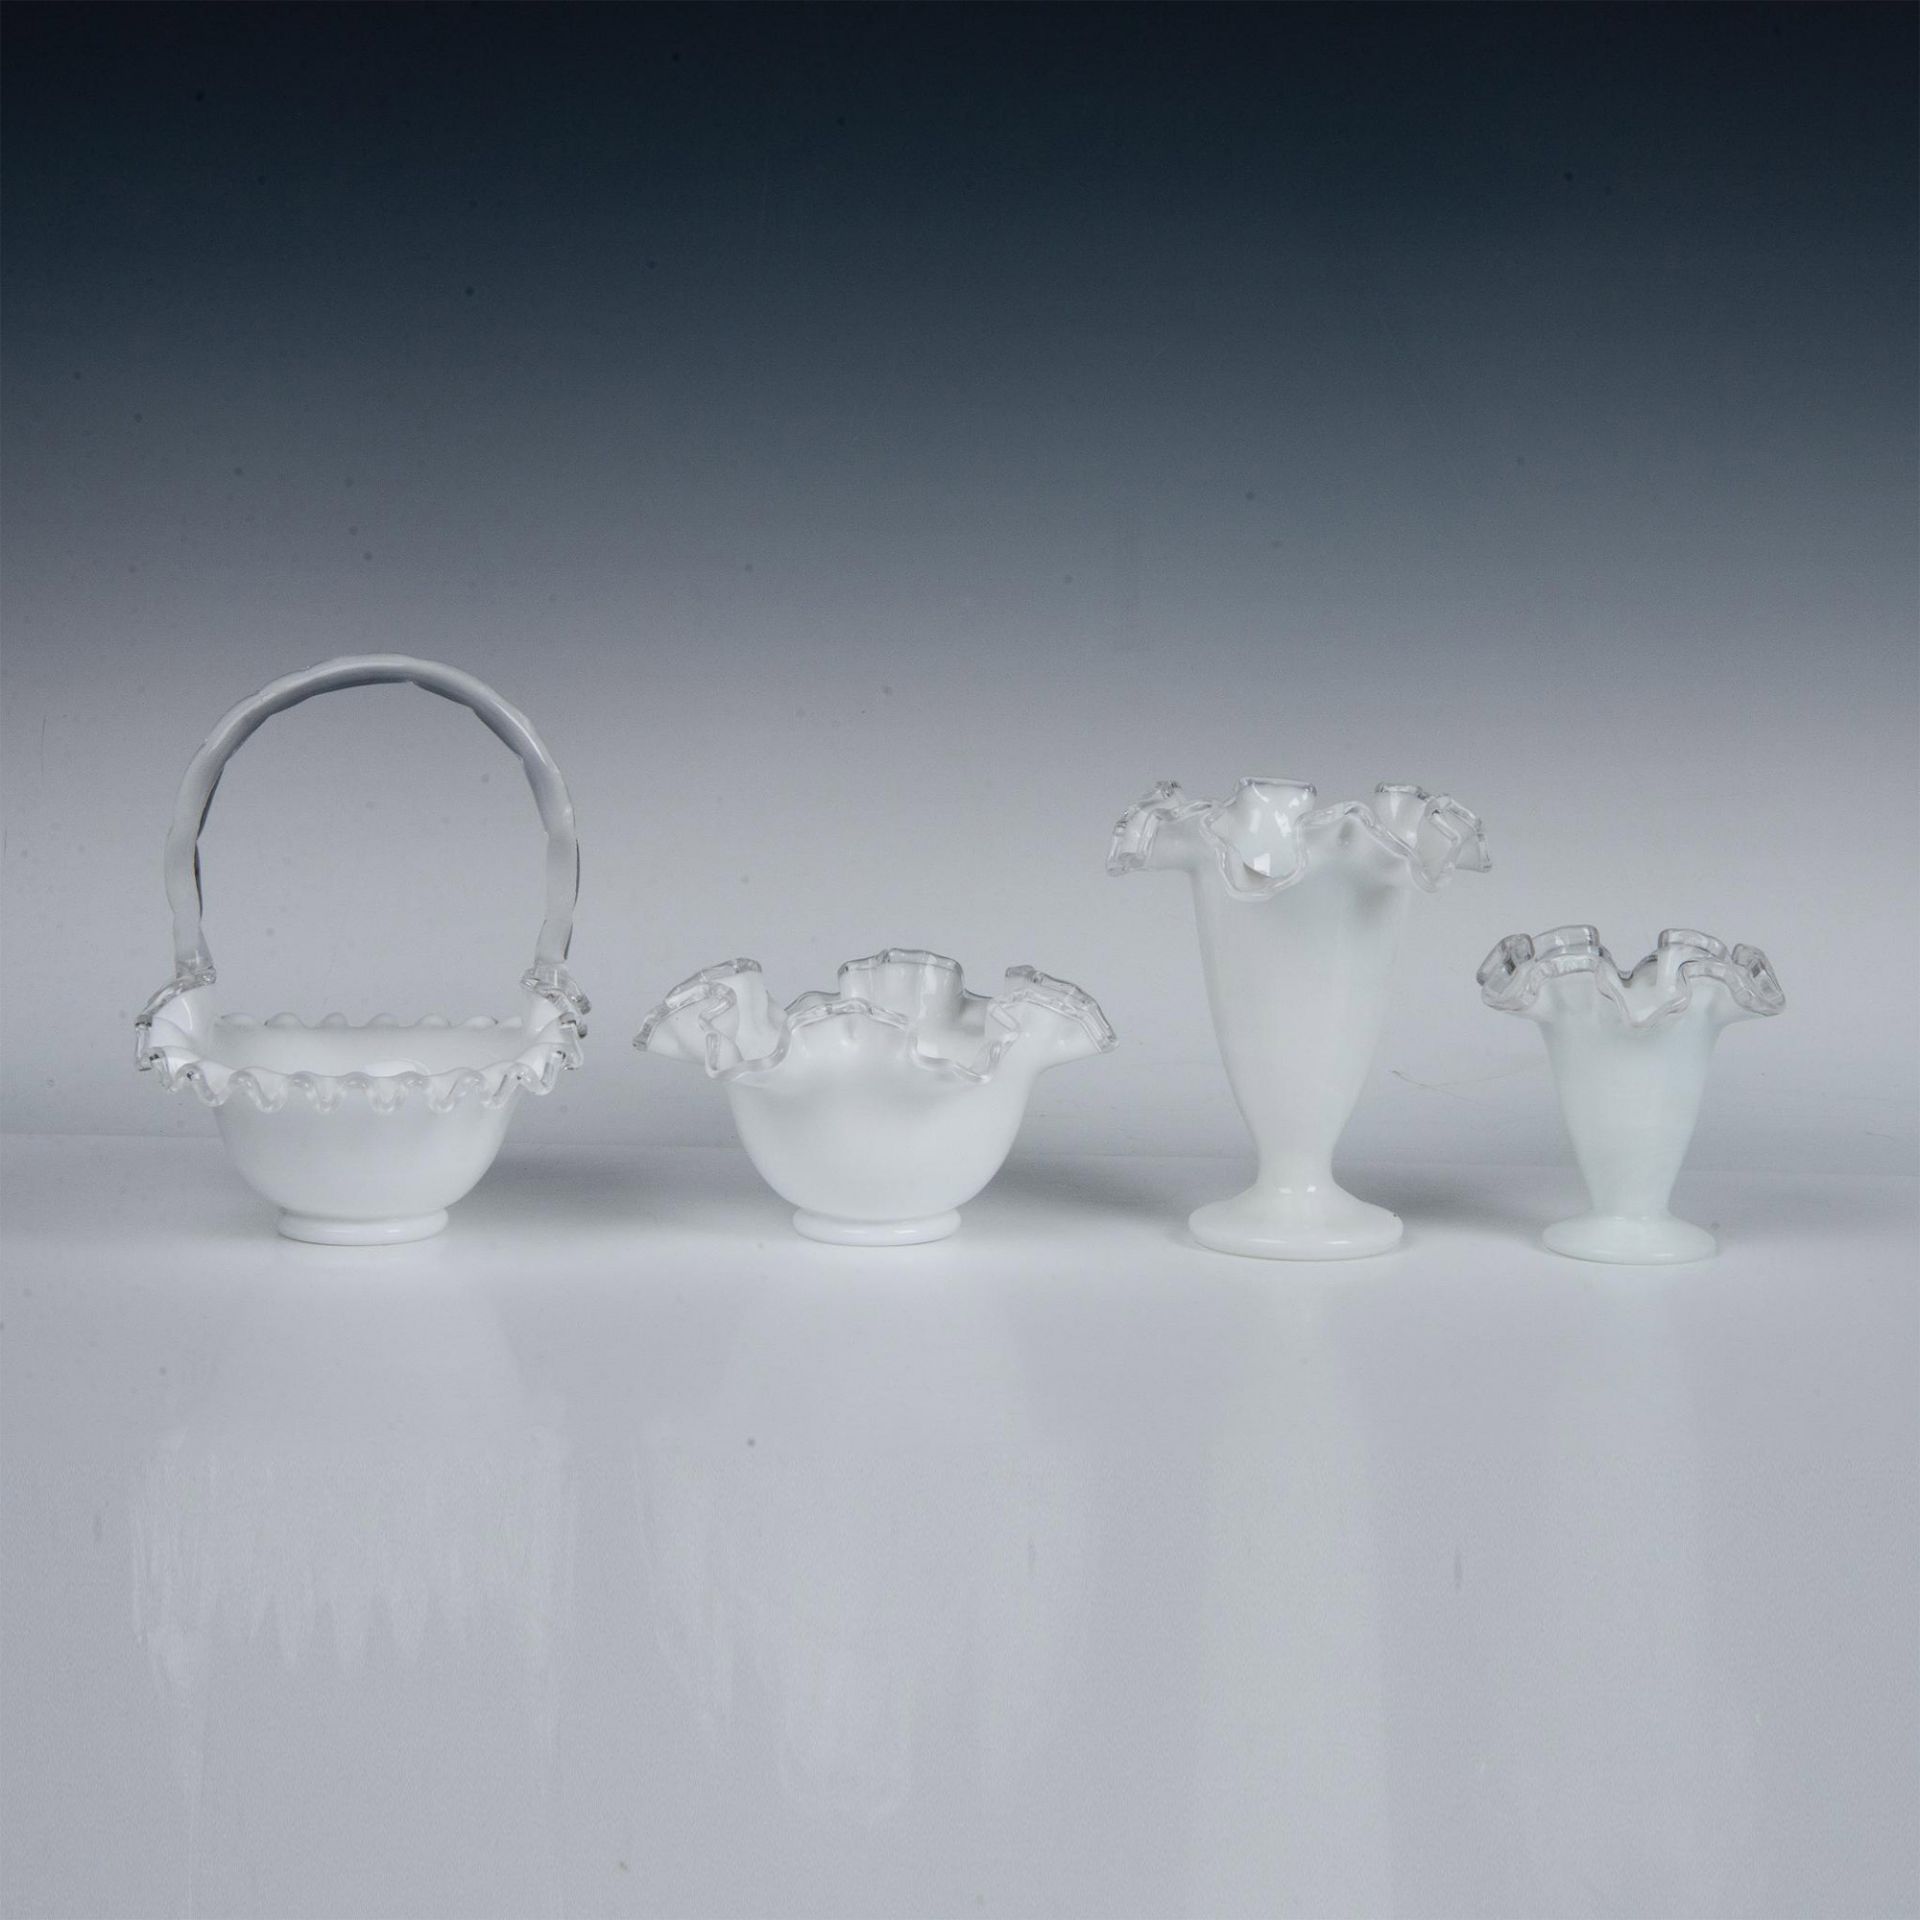 4pc Fenton Glass Tableware, Silver Crest - Image 2 of 4